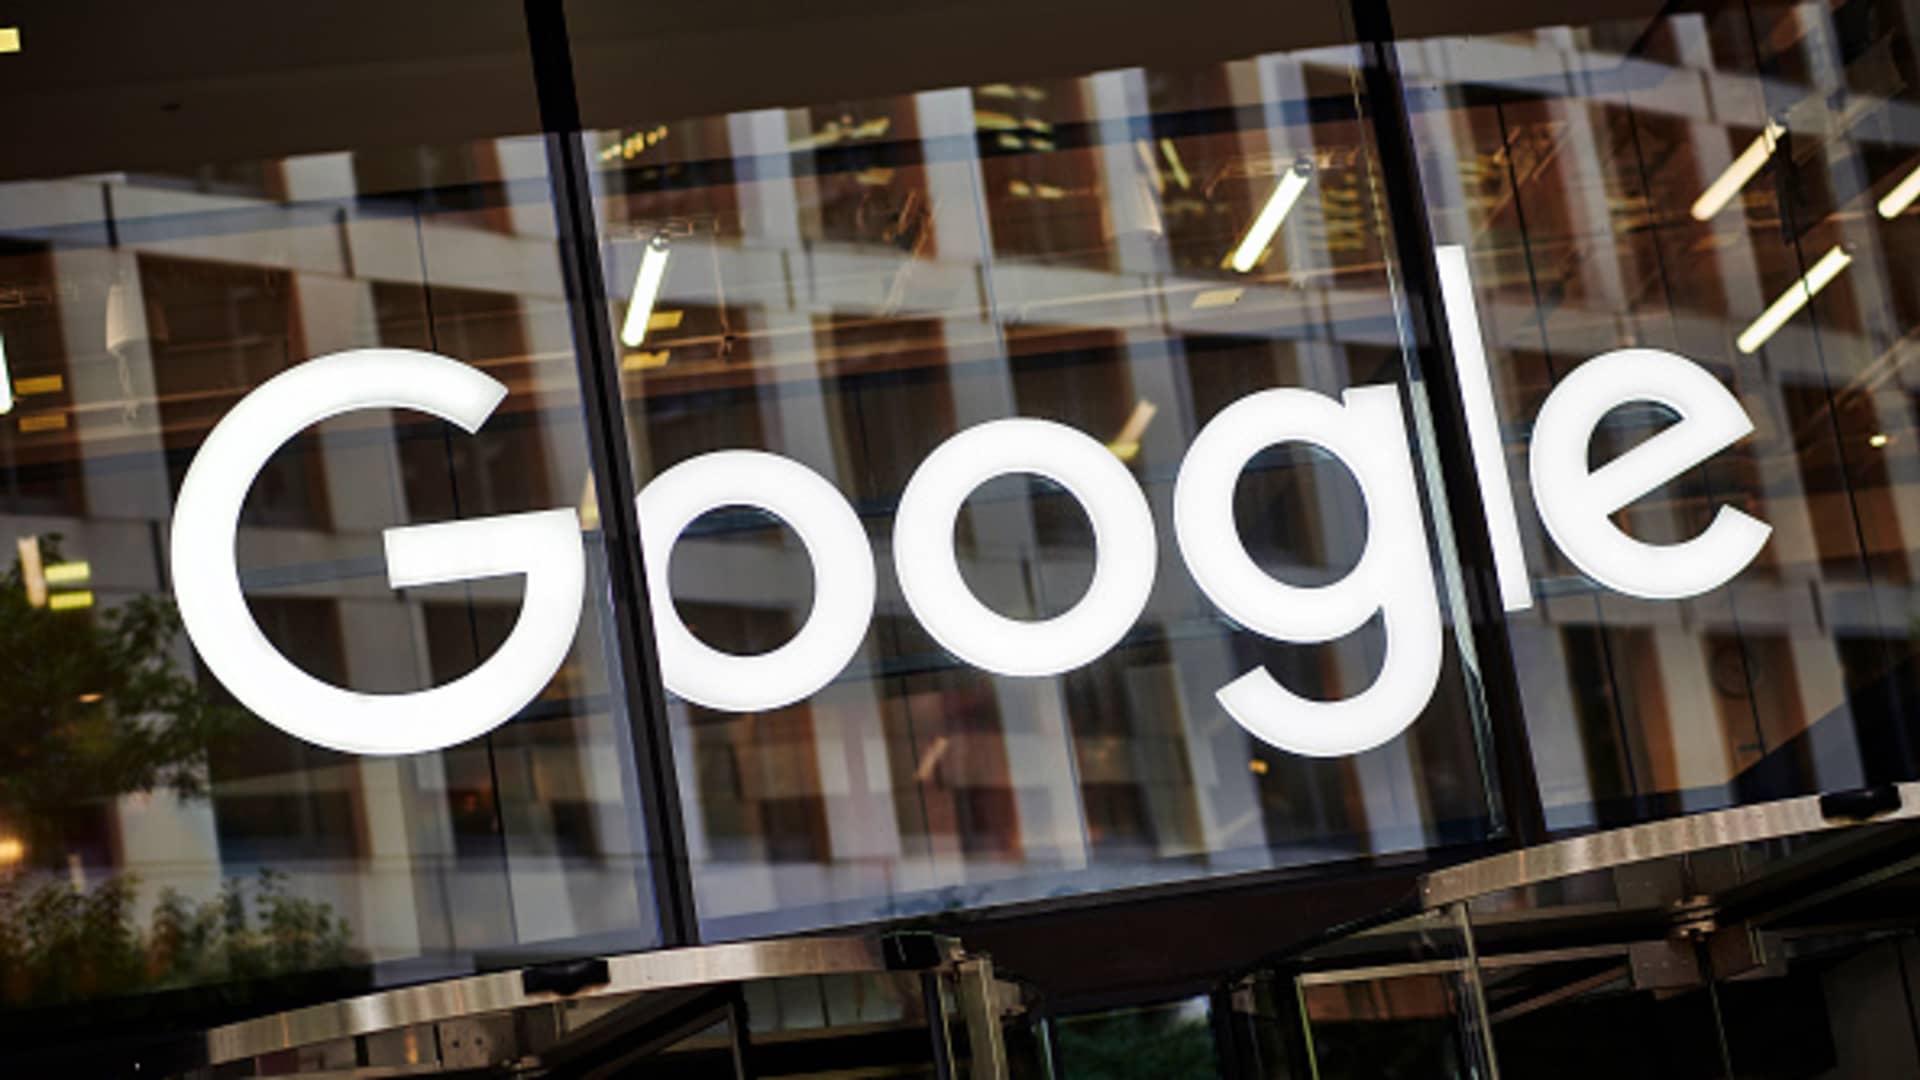 Google outage reported by thousands of customers across the area